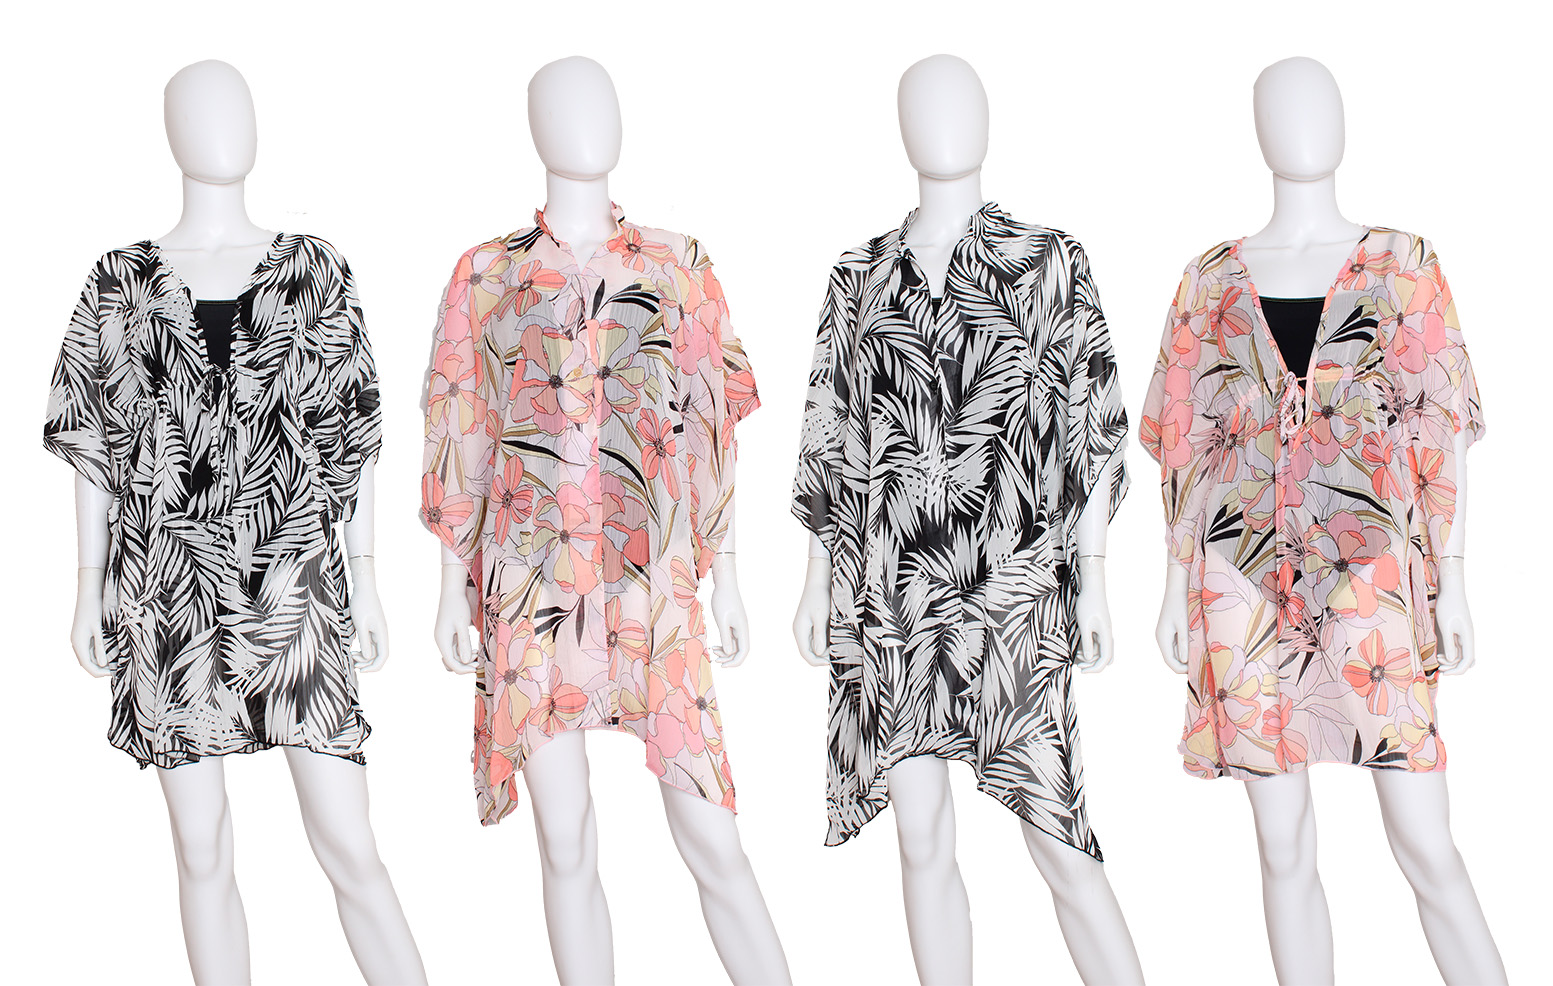 Women's Fashion Printed Terry Smocked Cover-Ups - Tropical Palm Tree & Floral Print -  Sizes Small-X